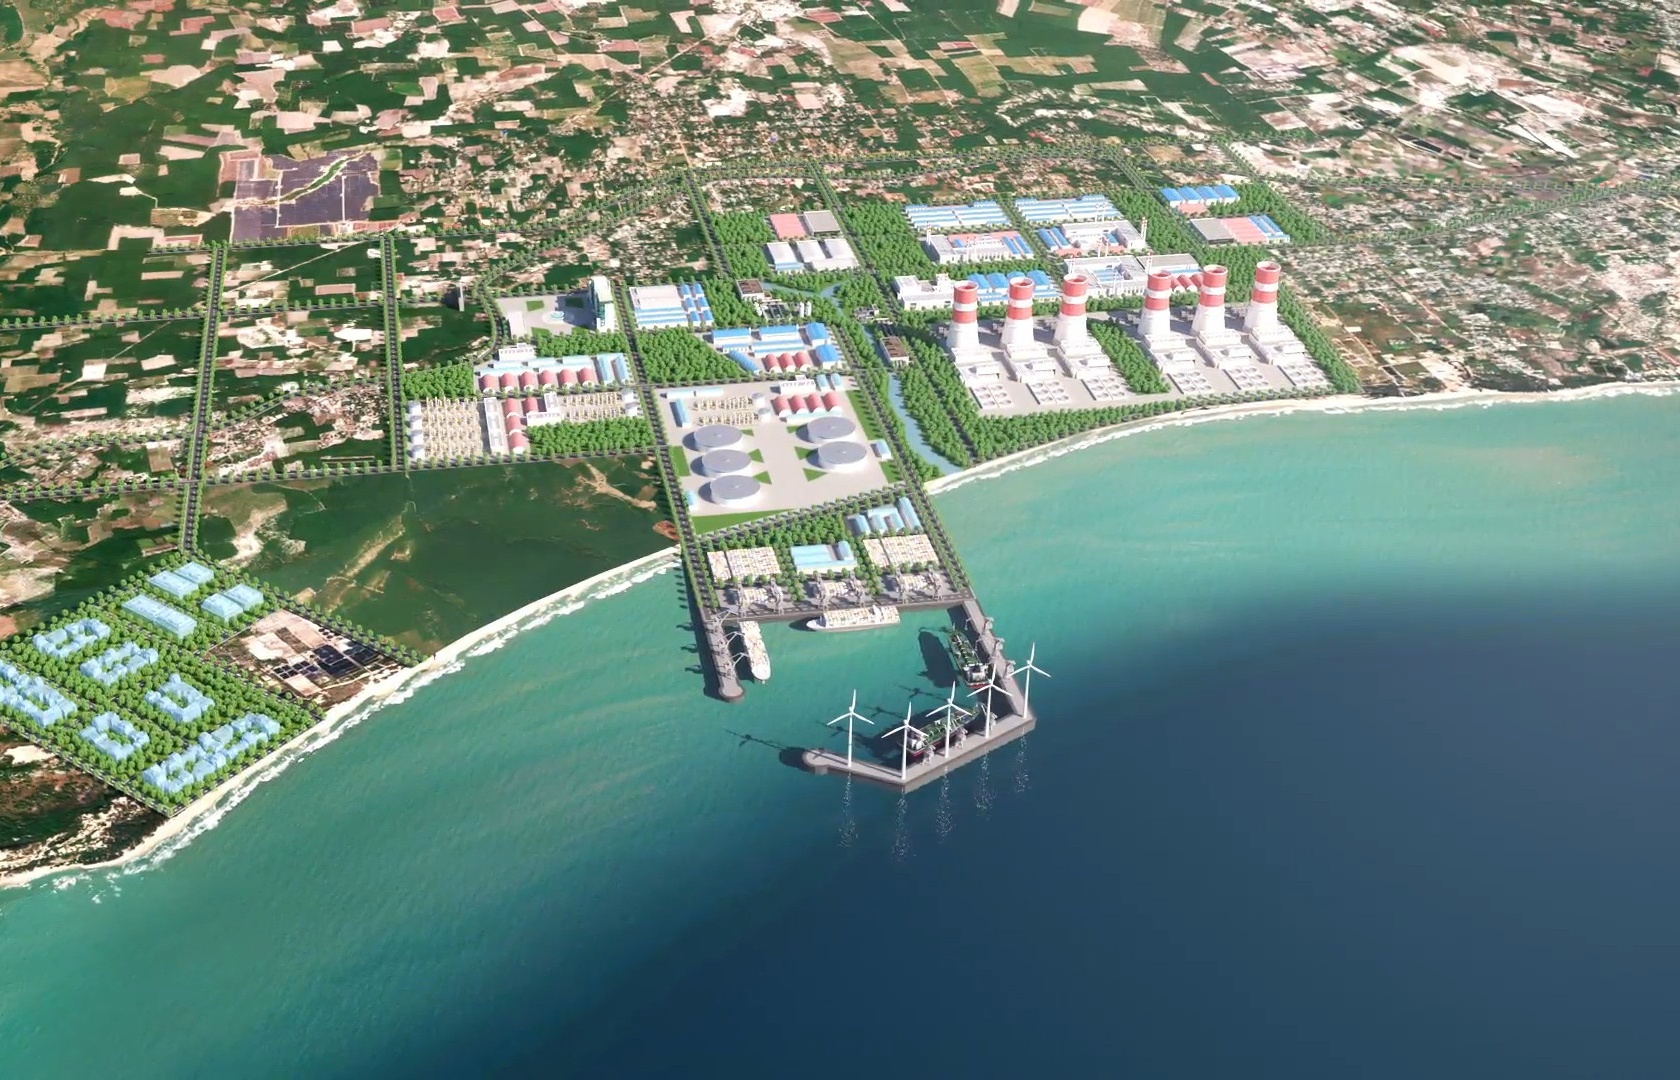 Son My I set to become first smart and green industrial park in Binh Thuan